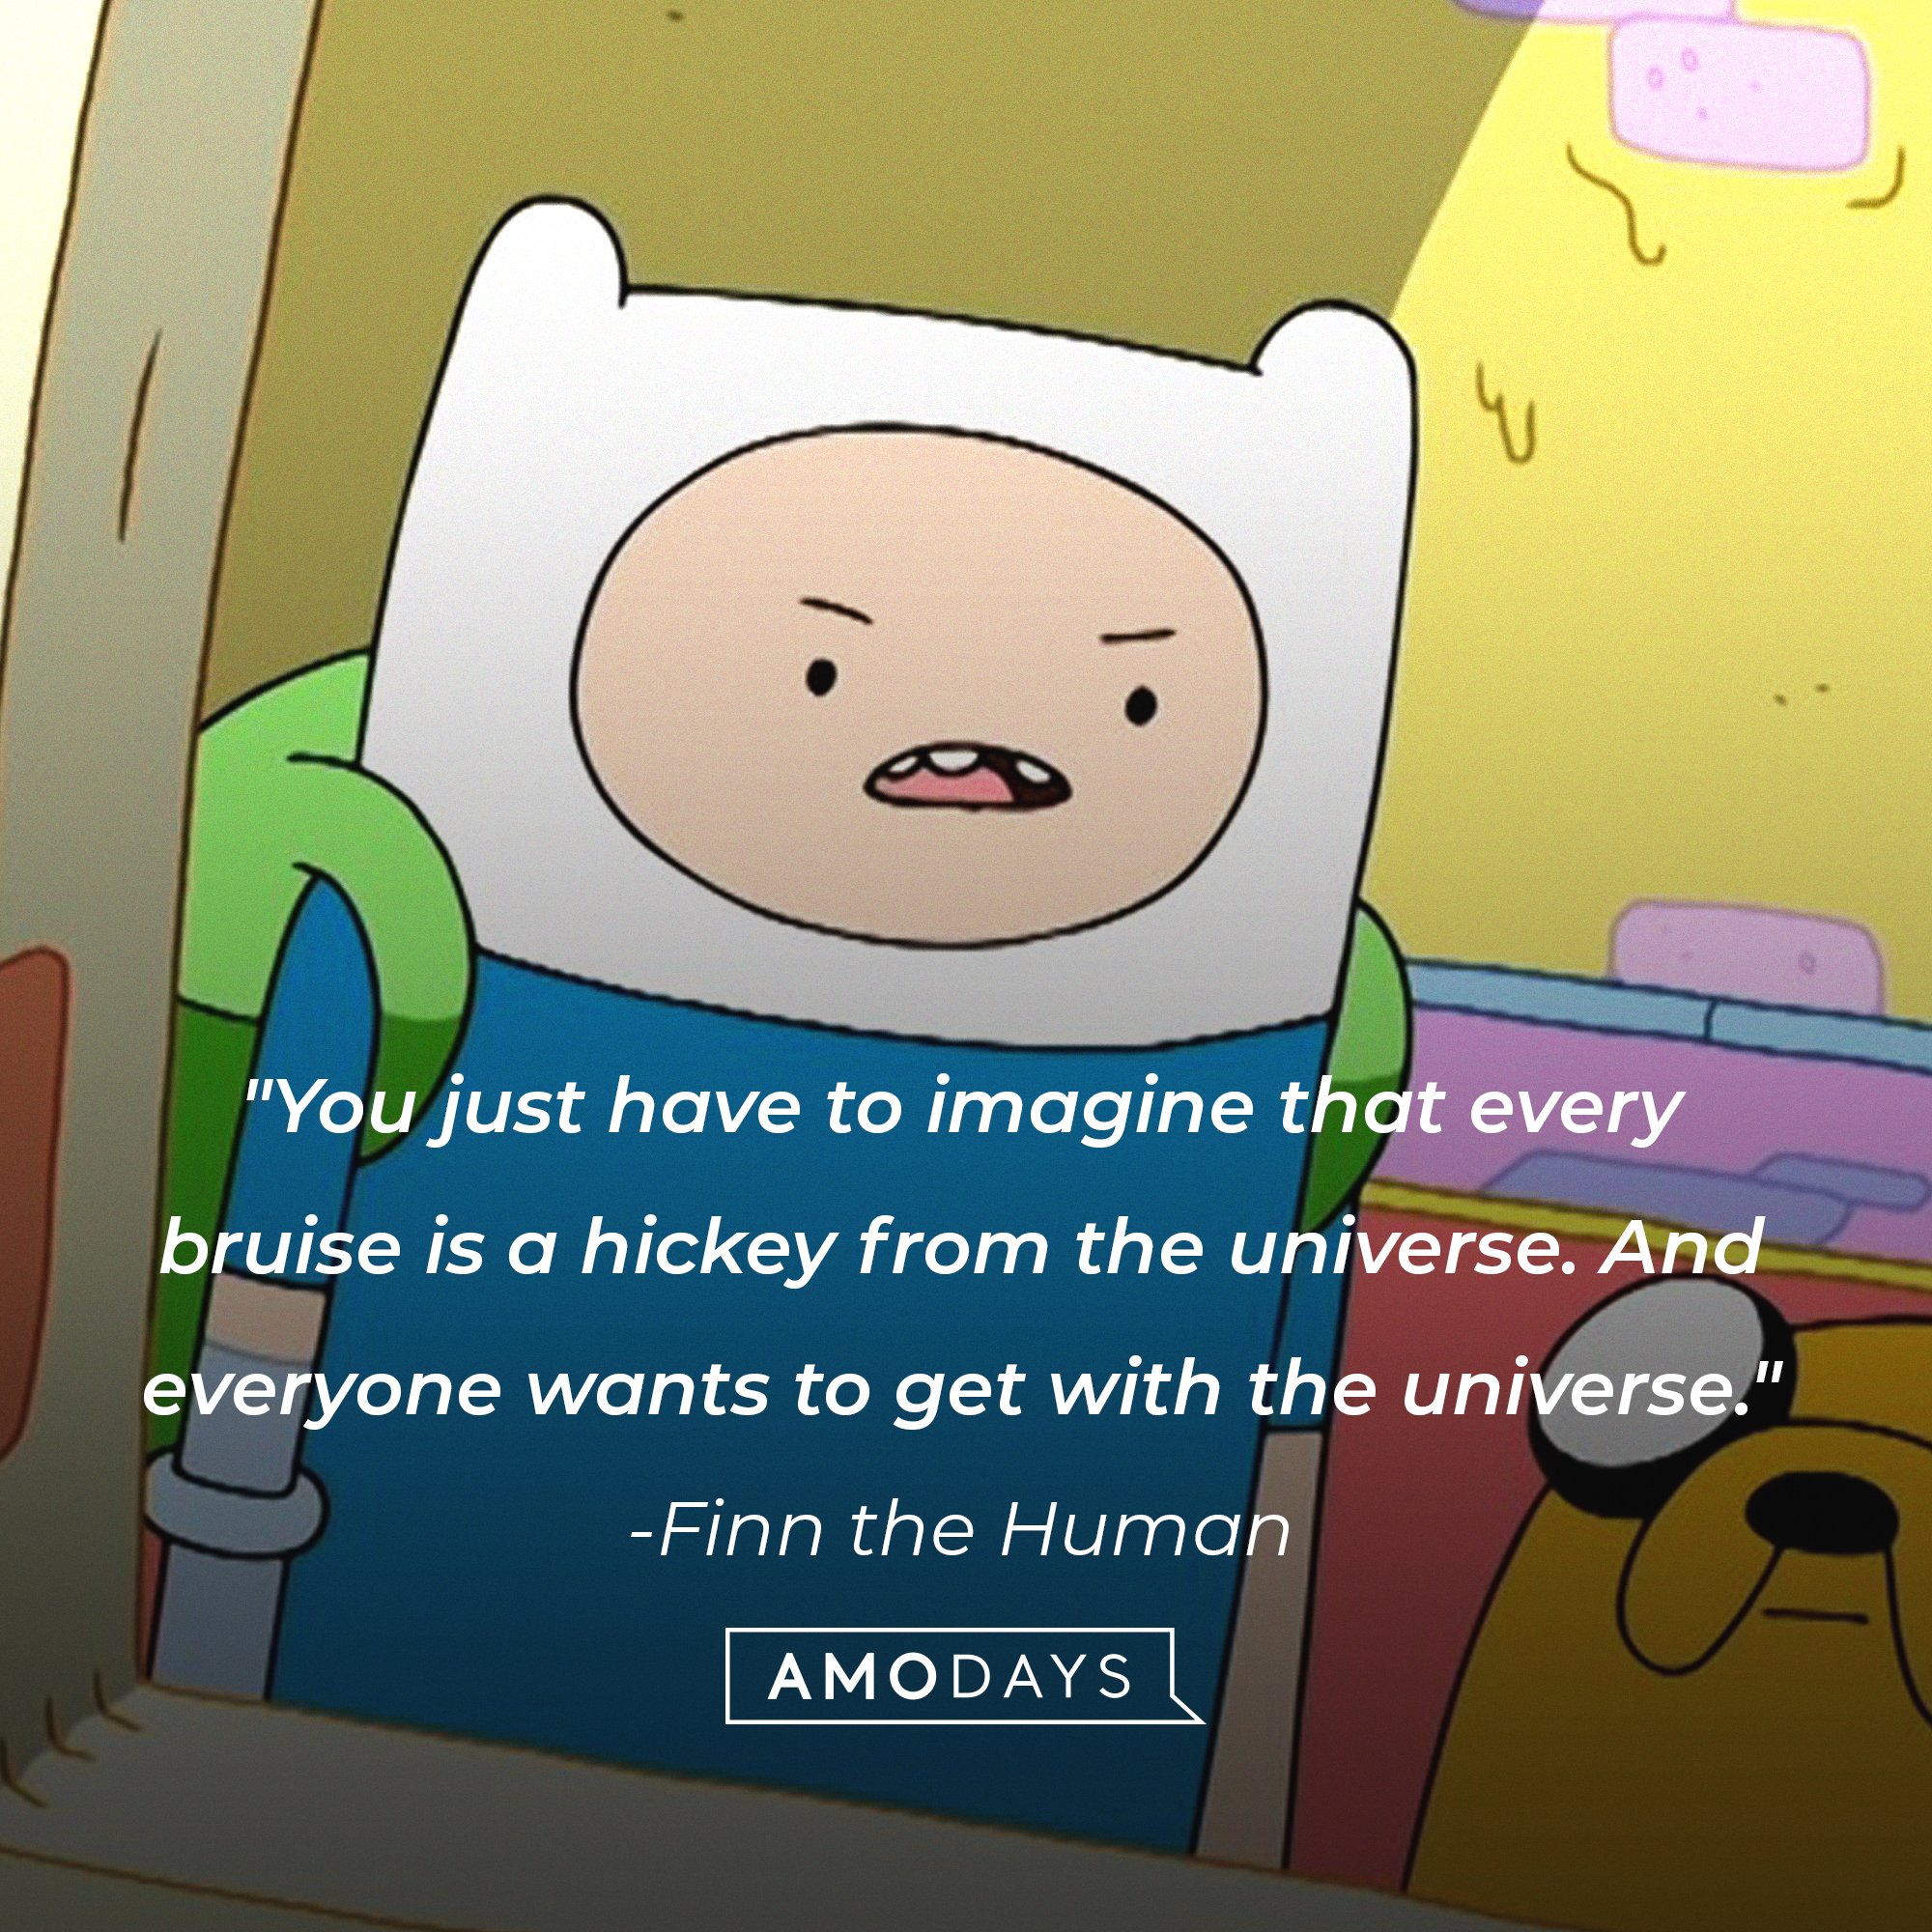    Finn the Human’s quote: "You just have to imagine that every bruise is a hickey from the universe. And everyone wants to get with the universe." | Image: AmoDays